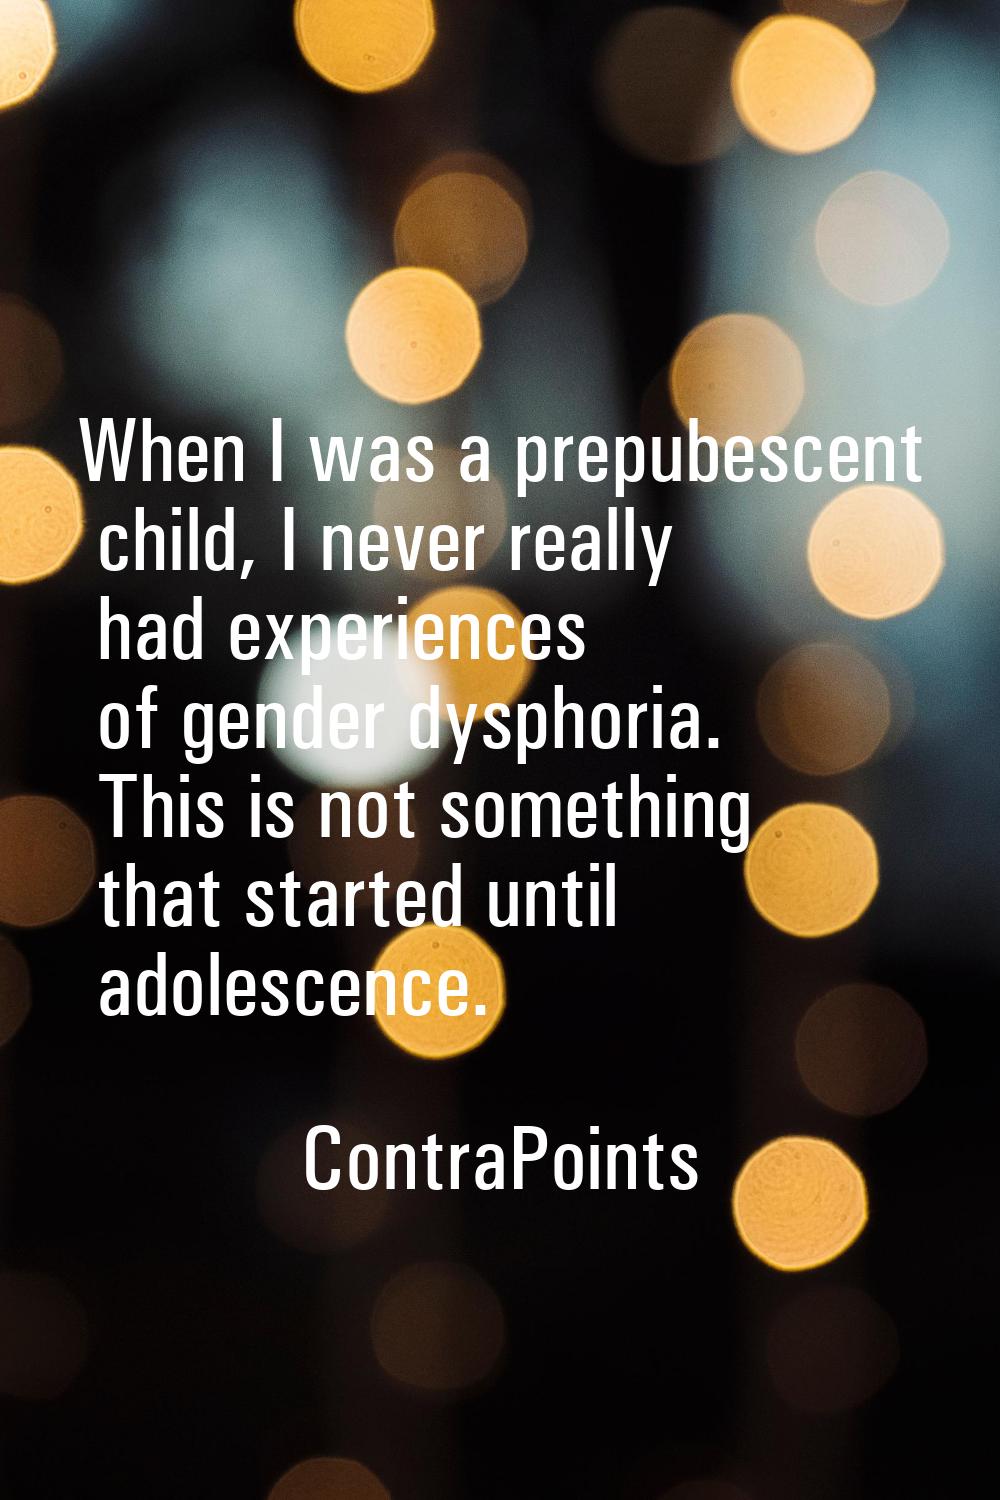 When I was a prepubescent child, I never really had experiences of gender dysphoria. This is not so